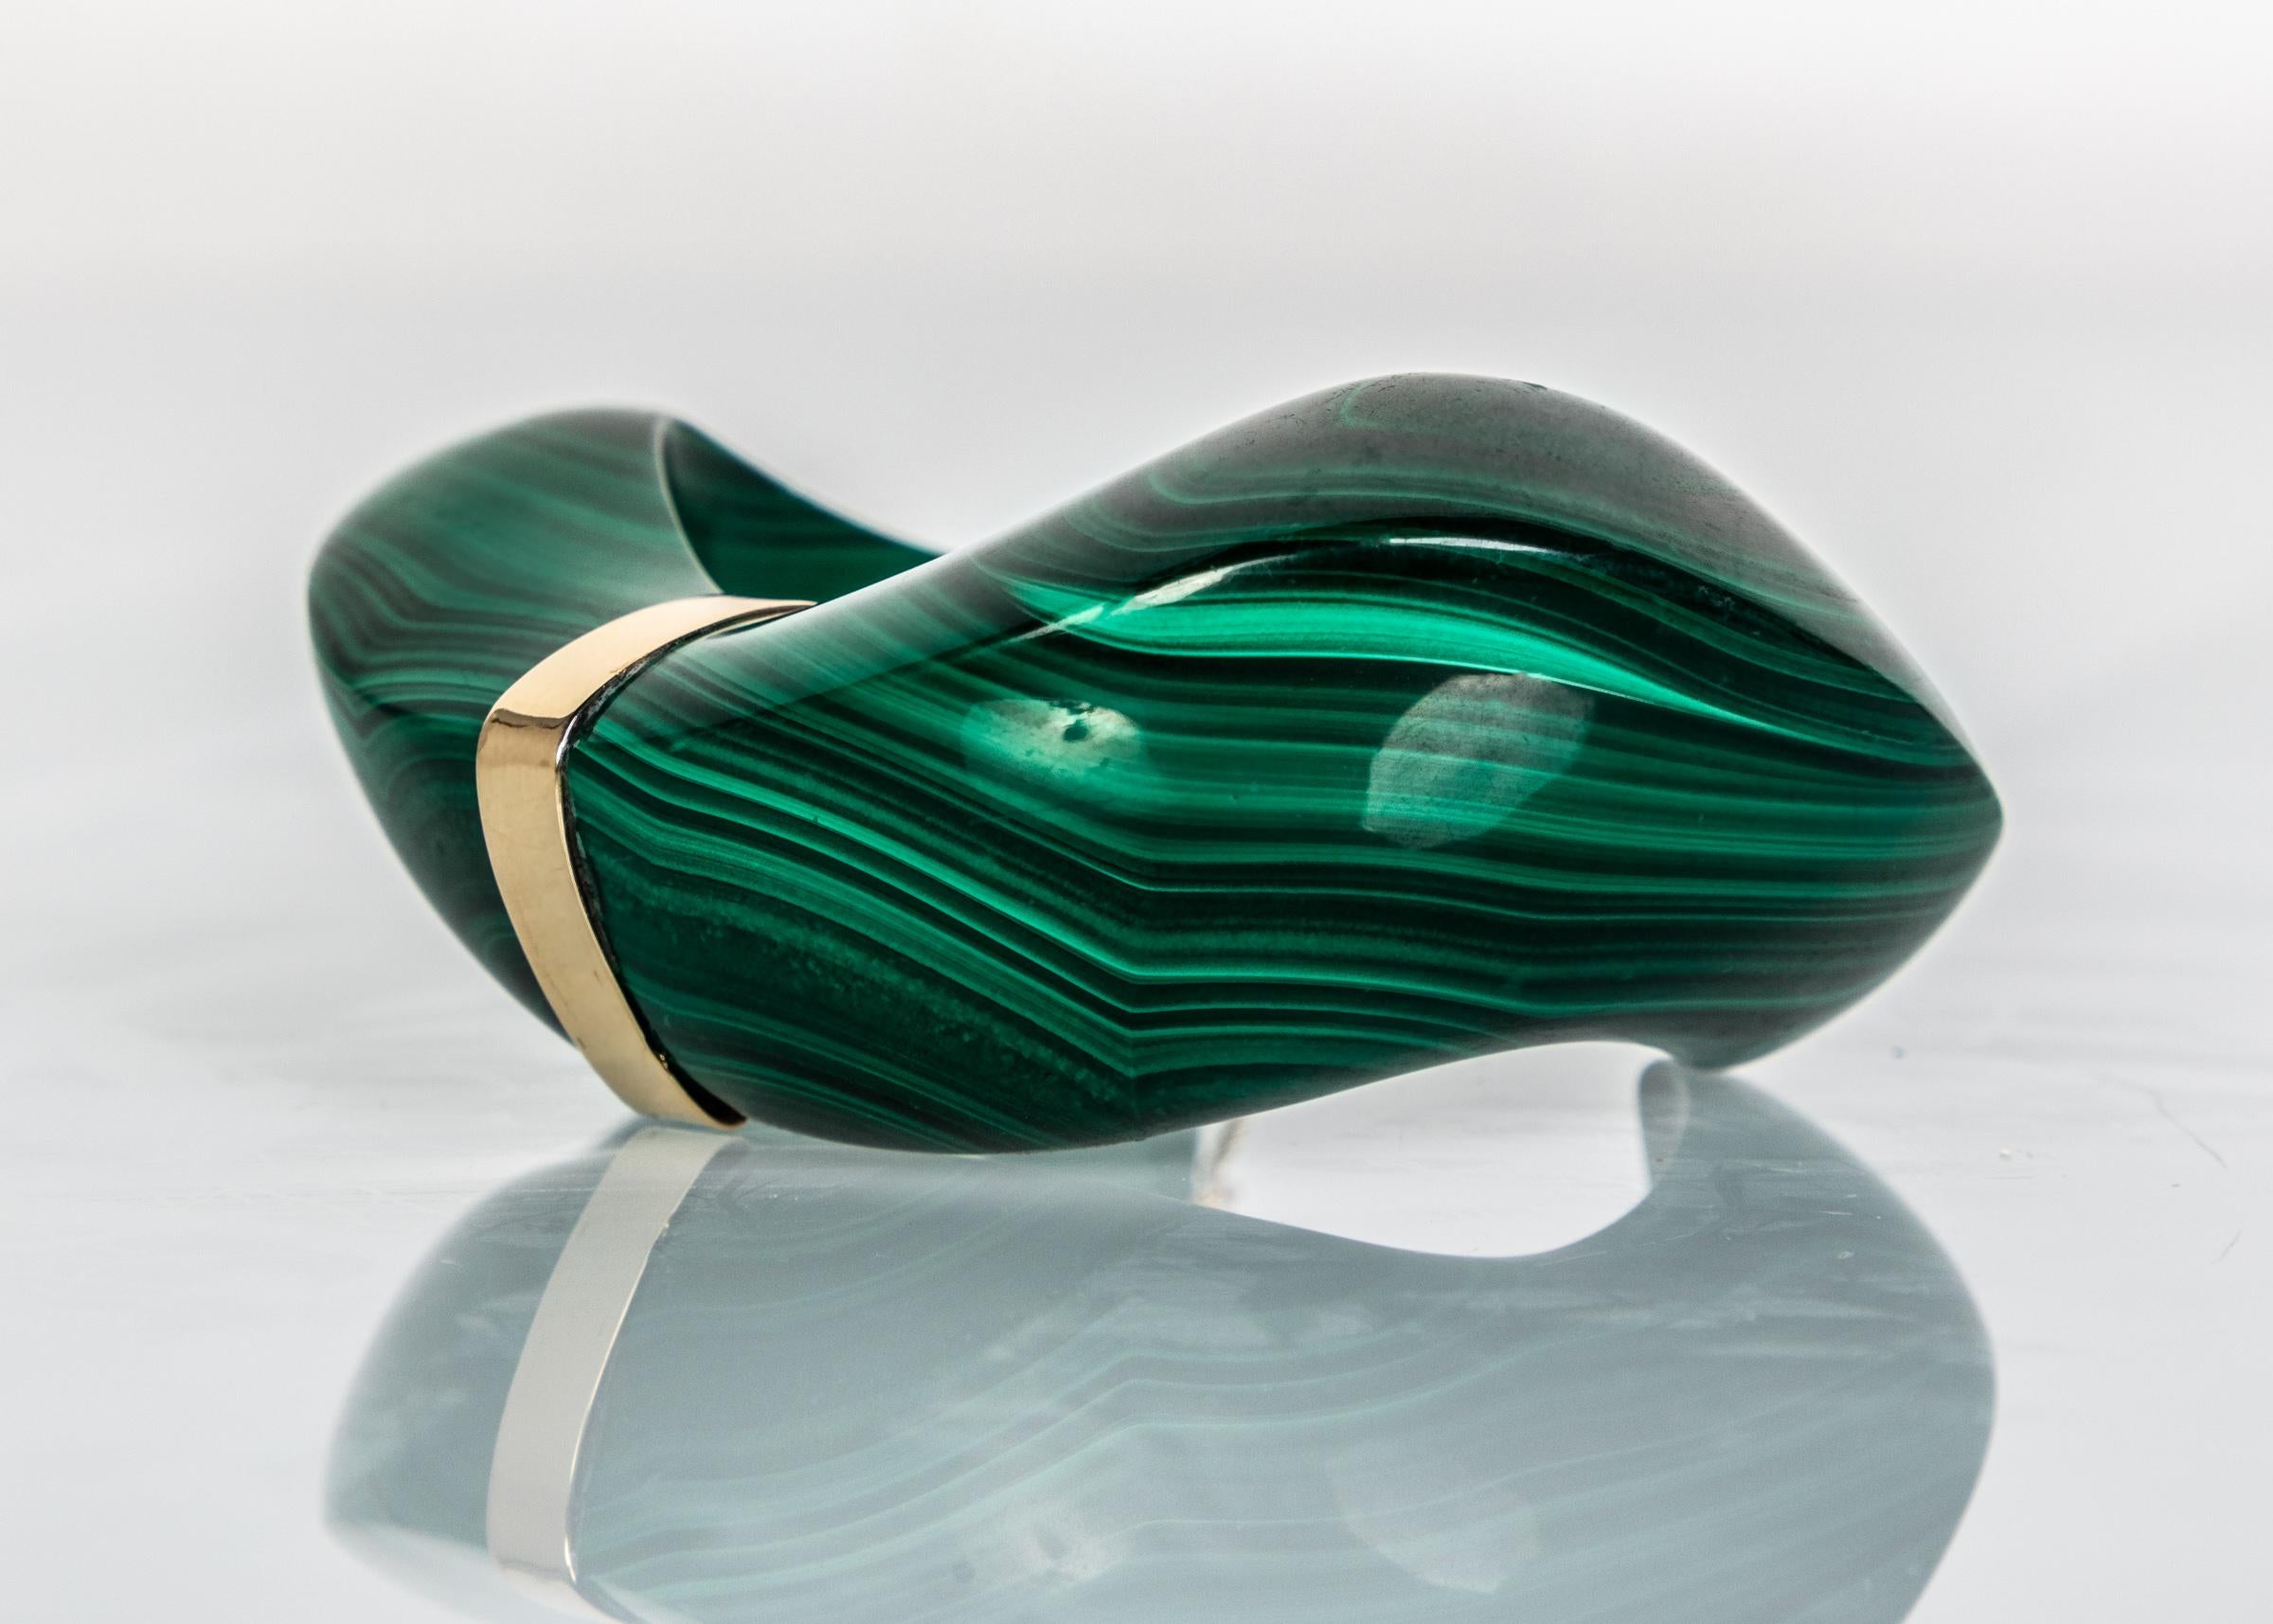 Malachite is an unmistakable stone known for its hallmark green color and signature natural striations. Notwithstanding its impeccable beauty, malachite for centuries has been thought to have protective qualities and is even said to foretell wealth.